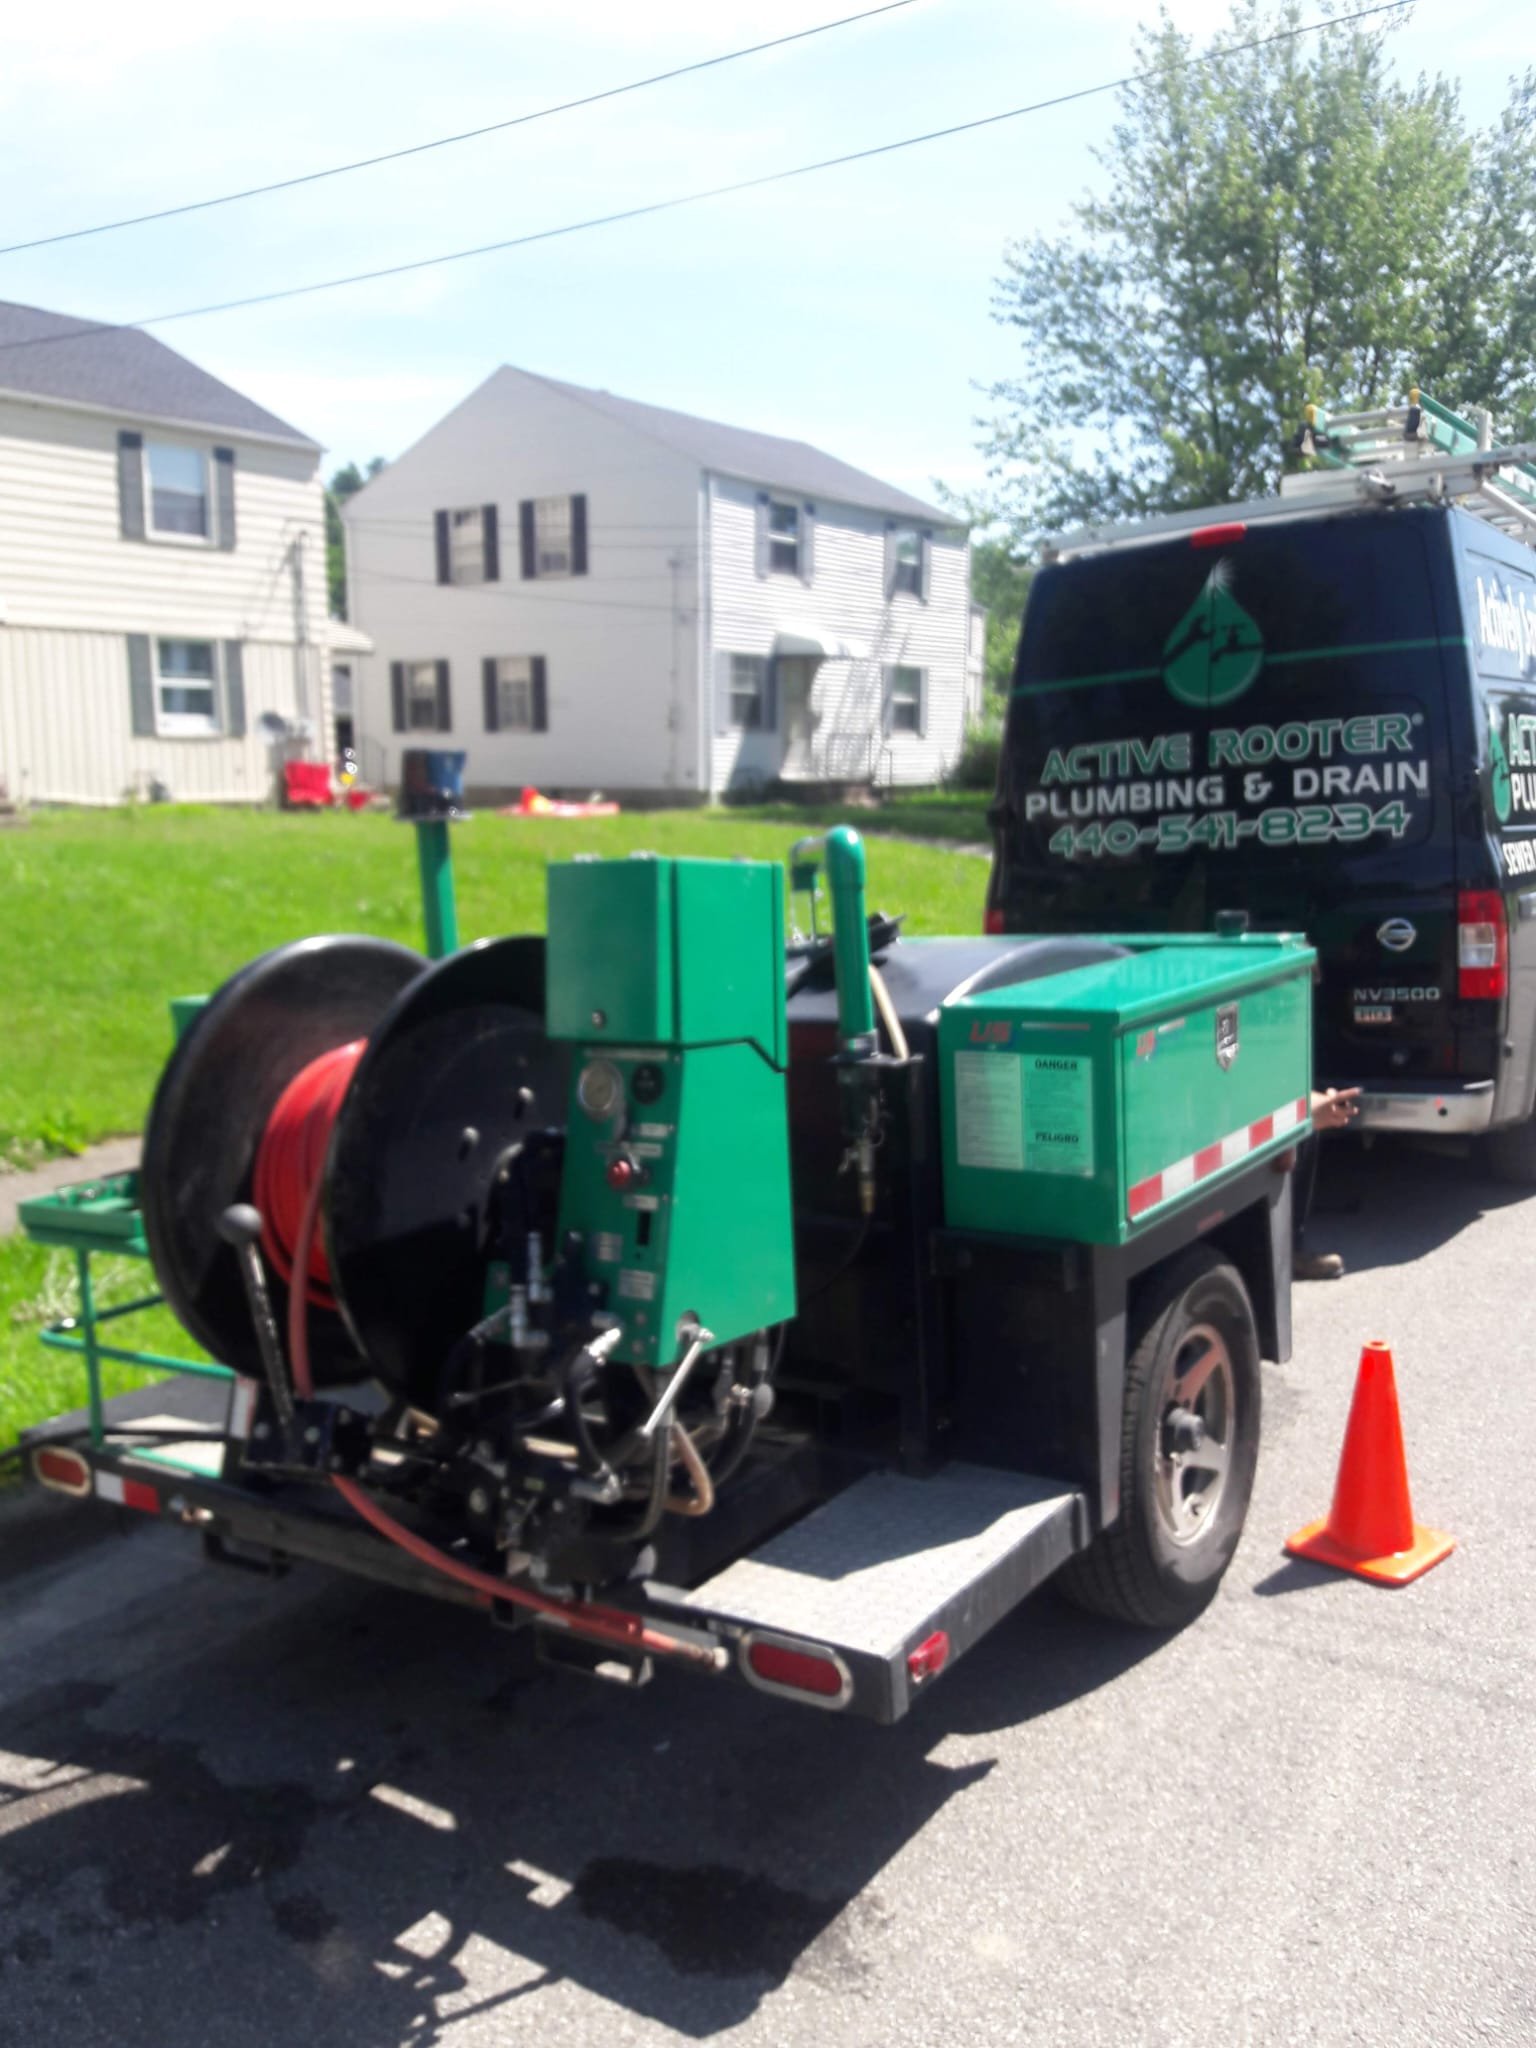 Need Sewer Jetting? Contact Active Rooter Plumbing & Drain Cleaning Today.